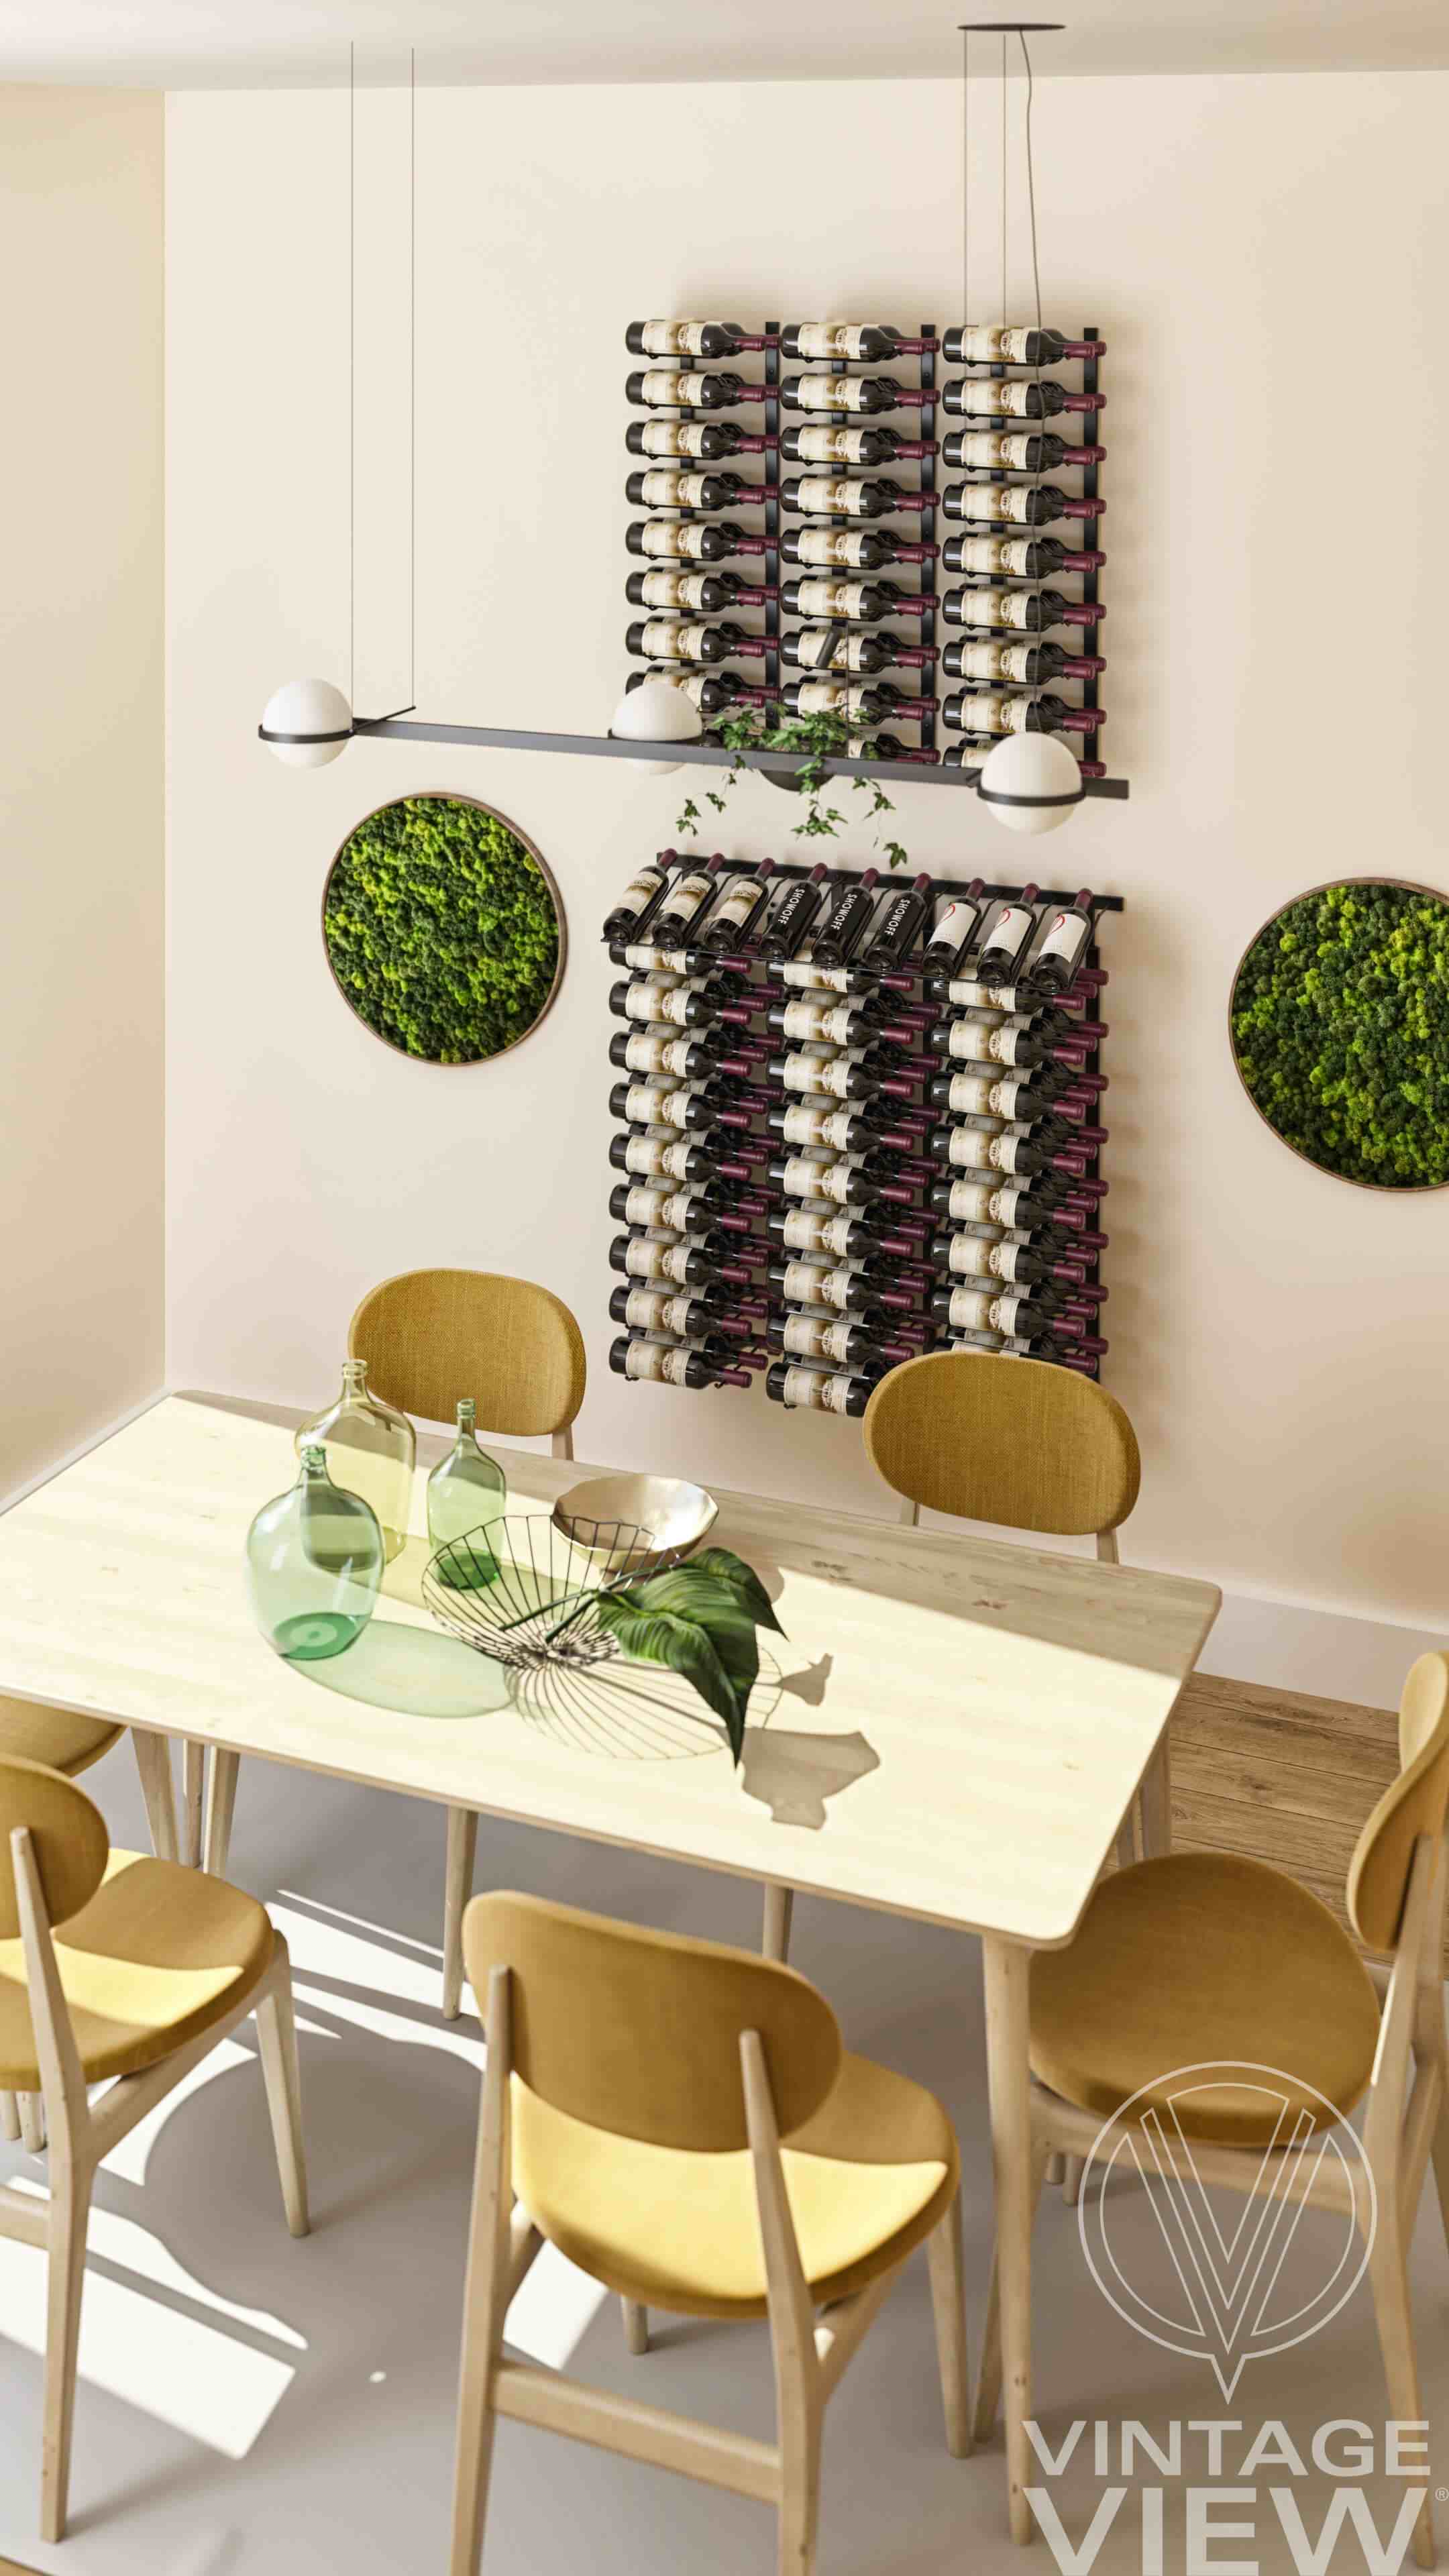 Example of Presenation Wine Wall kit in dining room